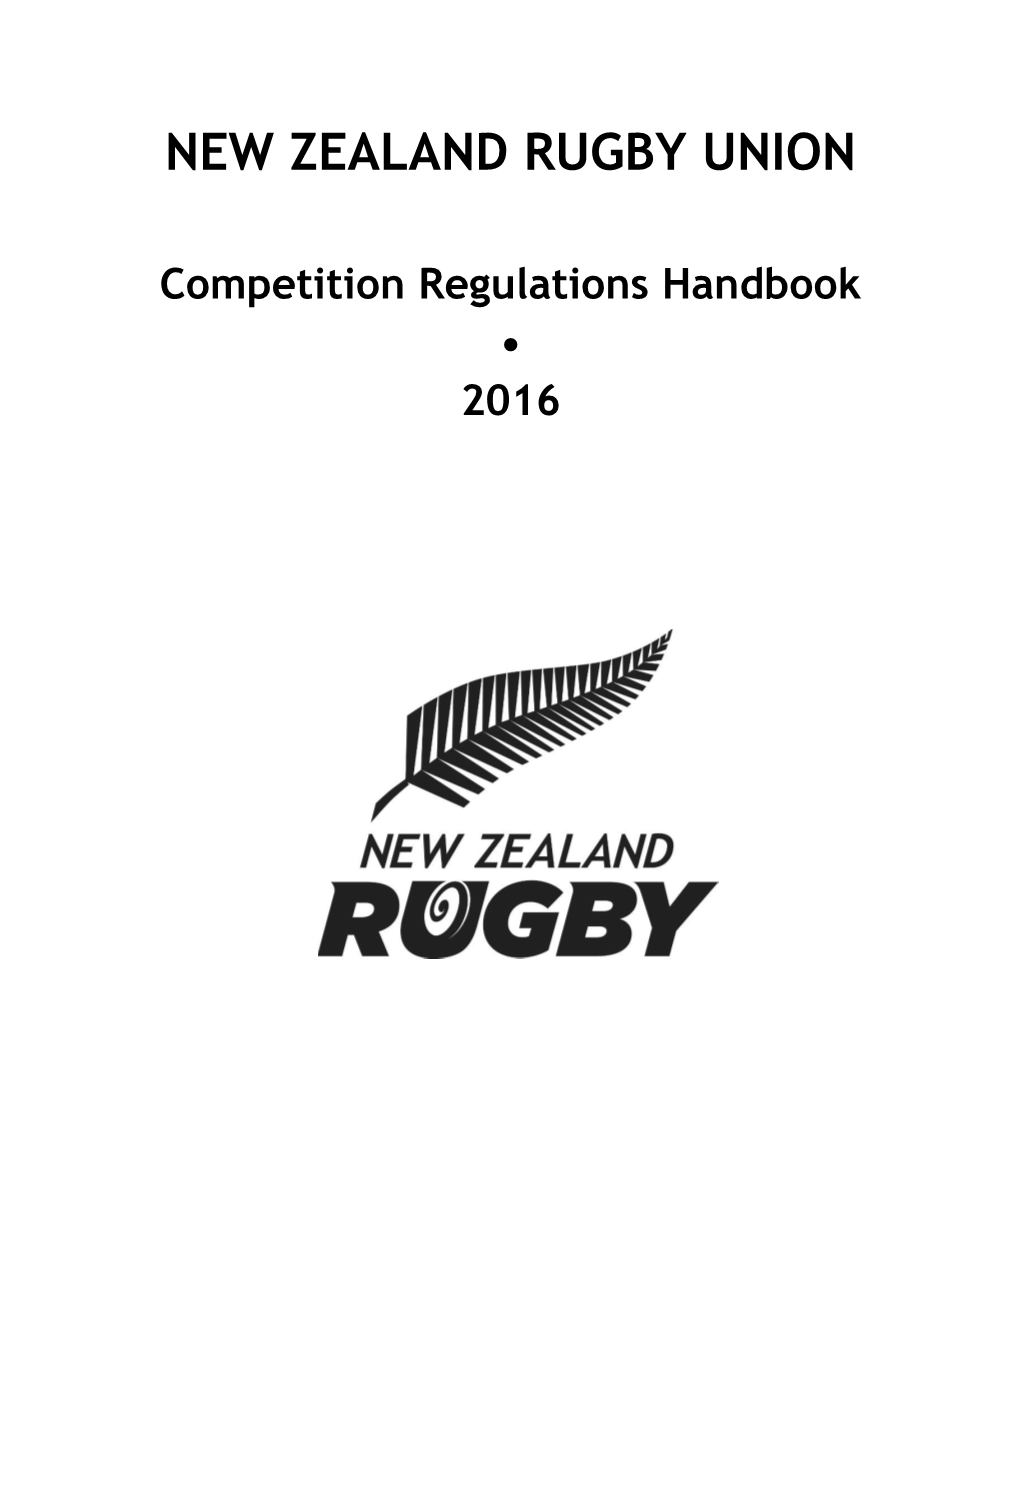 New Zealand Rugby Union